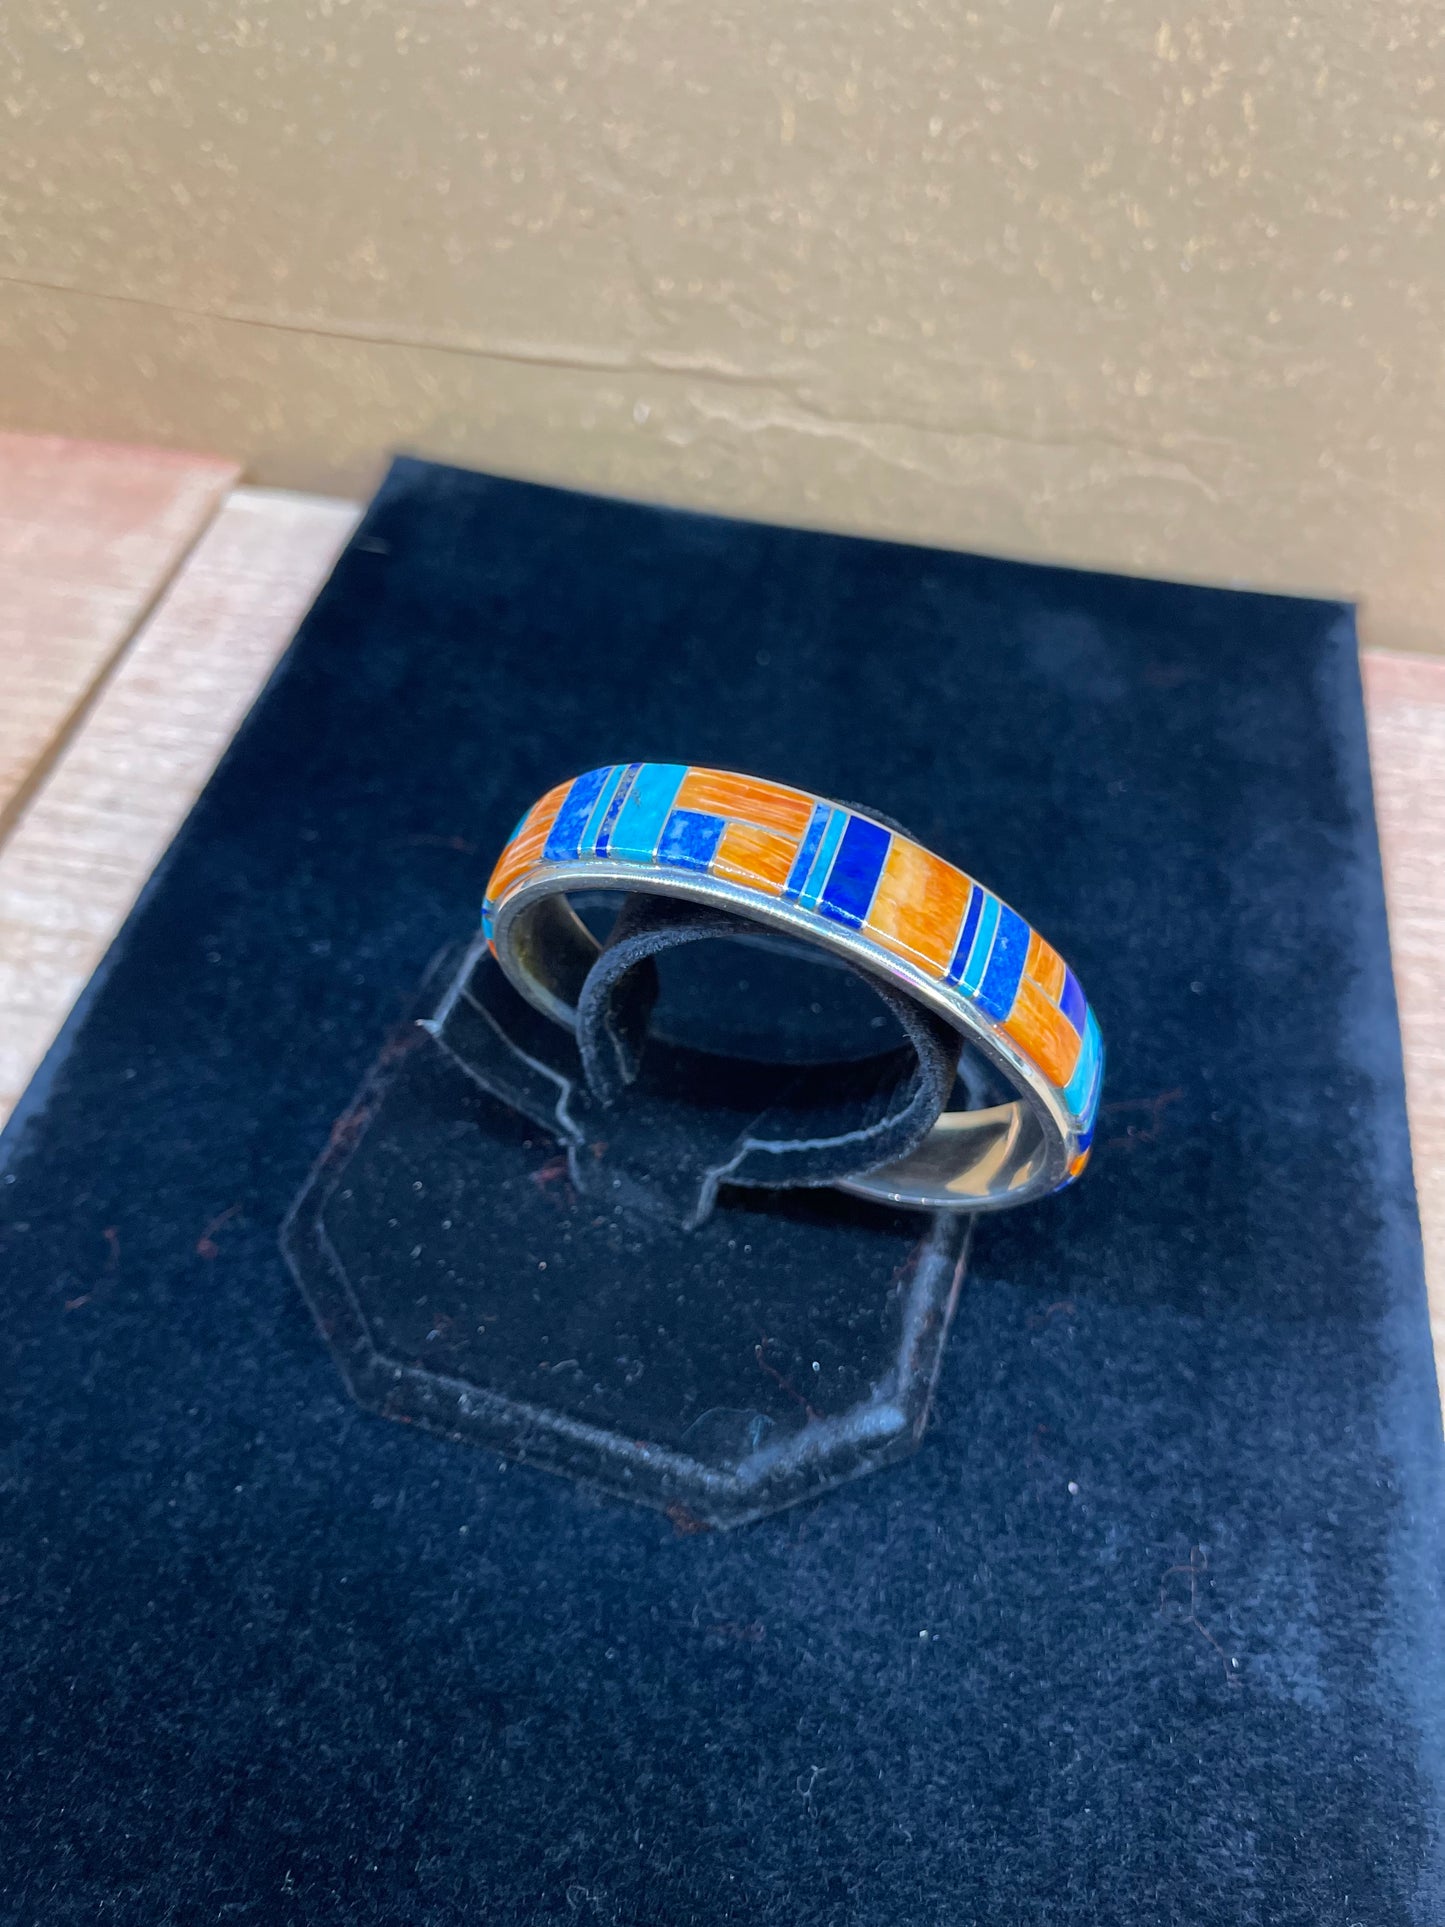 Navajo Orange Spiny And Turquoise With Lapis Cuff Bracelet By Arlo Kanteena